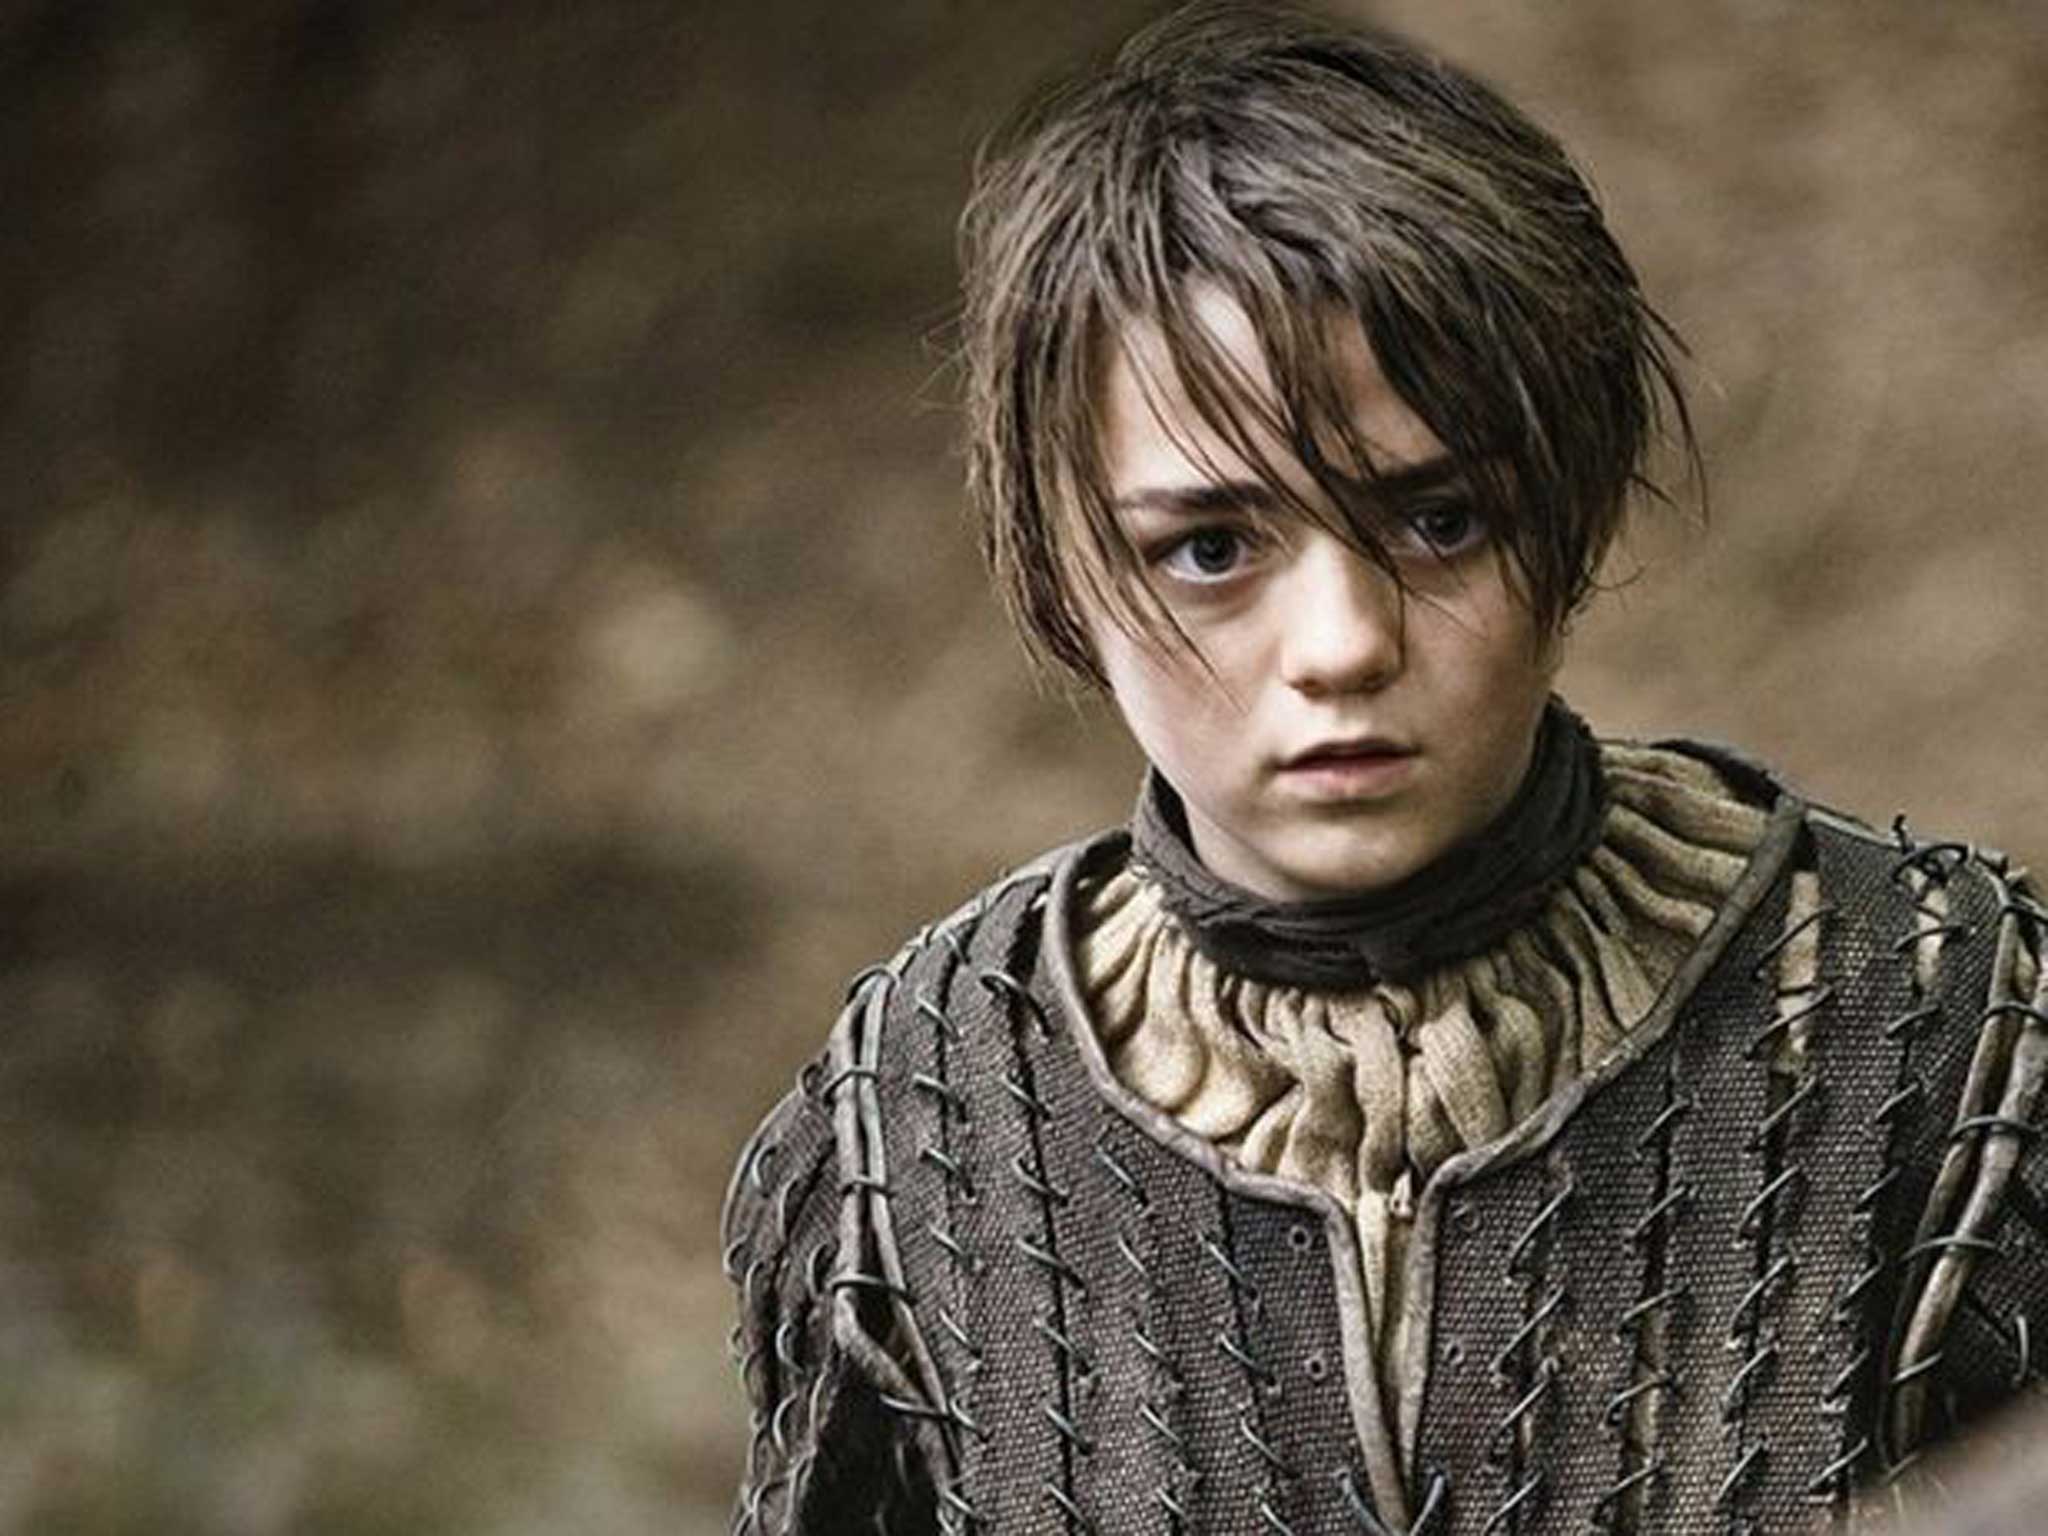 Maisie Williams as Arya in the first season of Game of Thrones